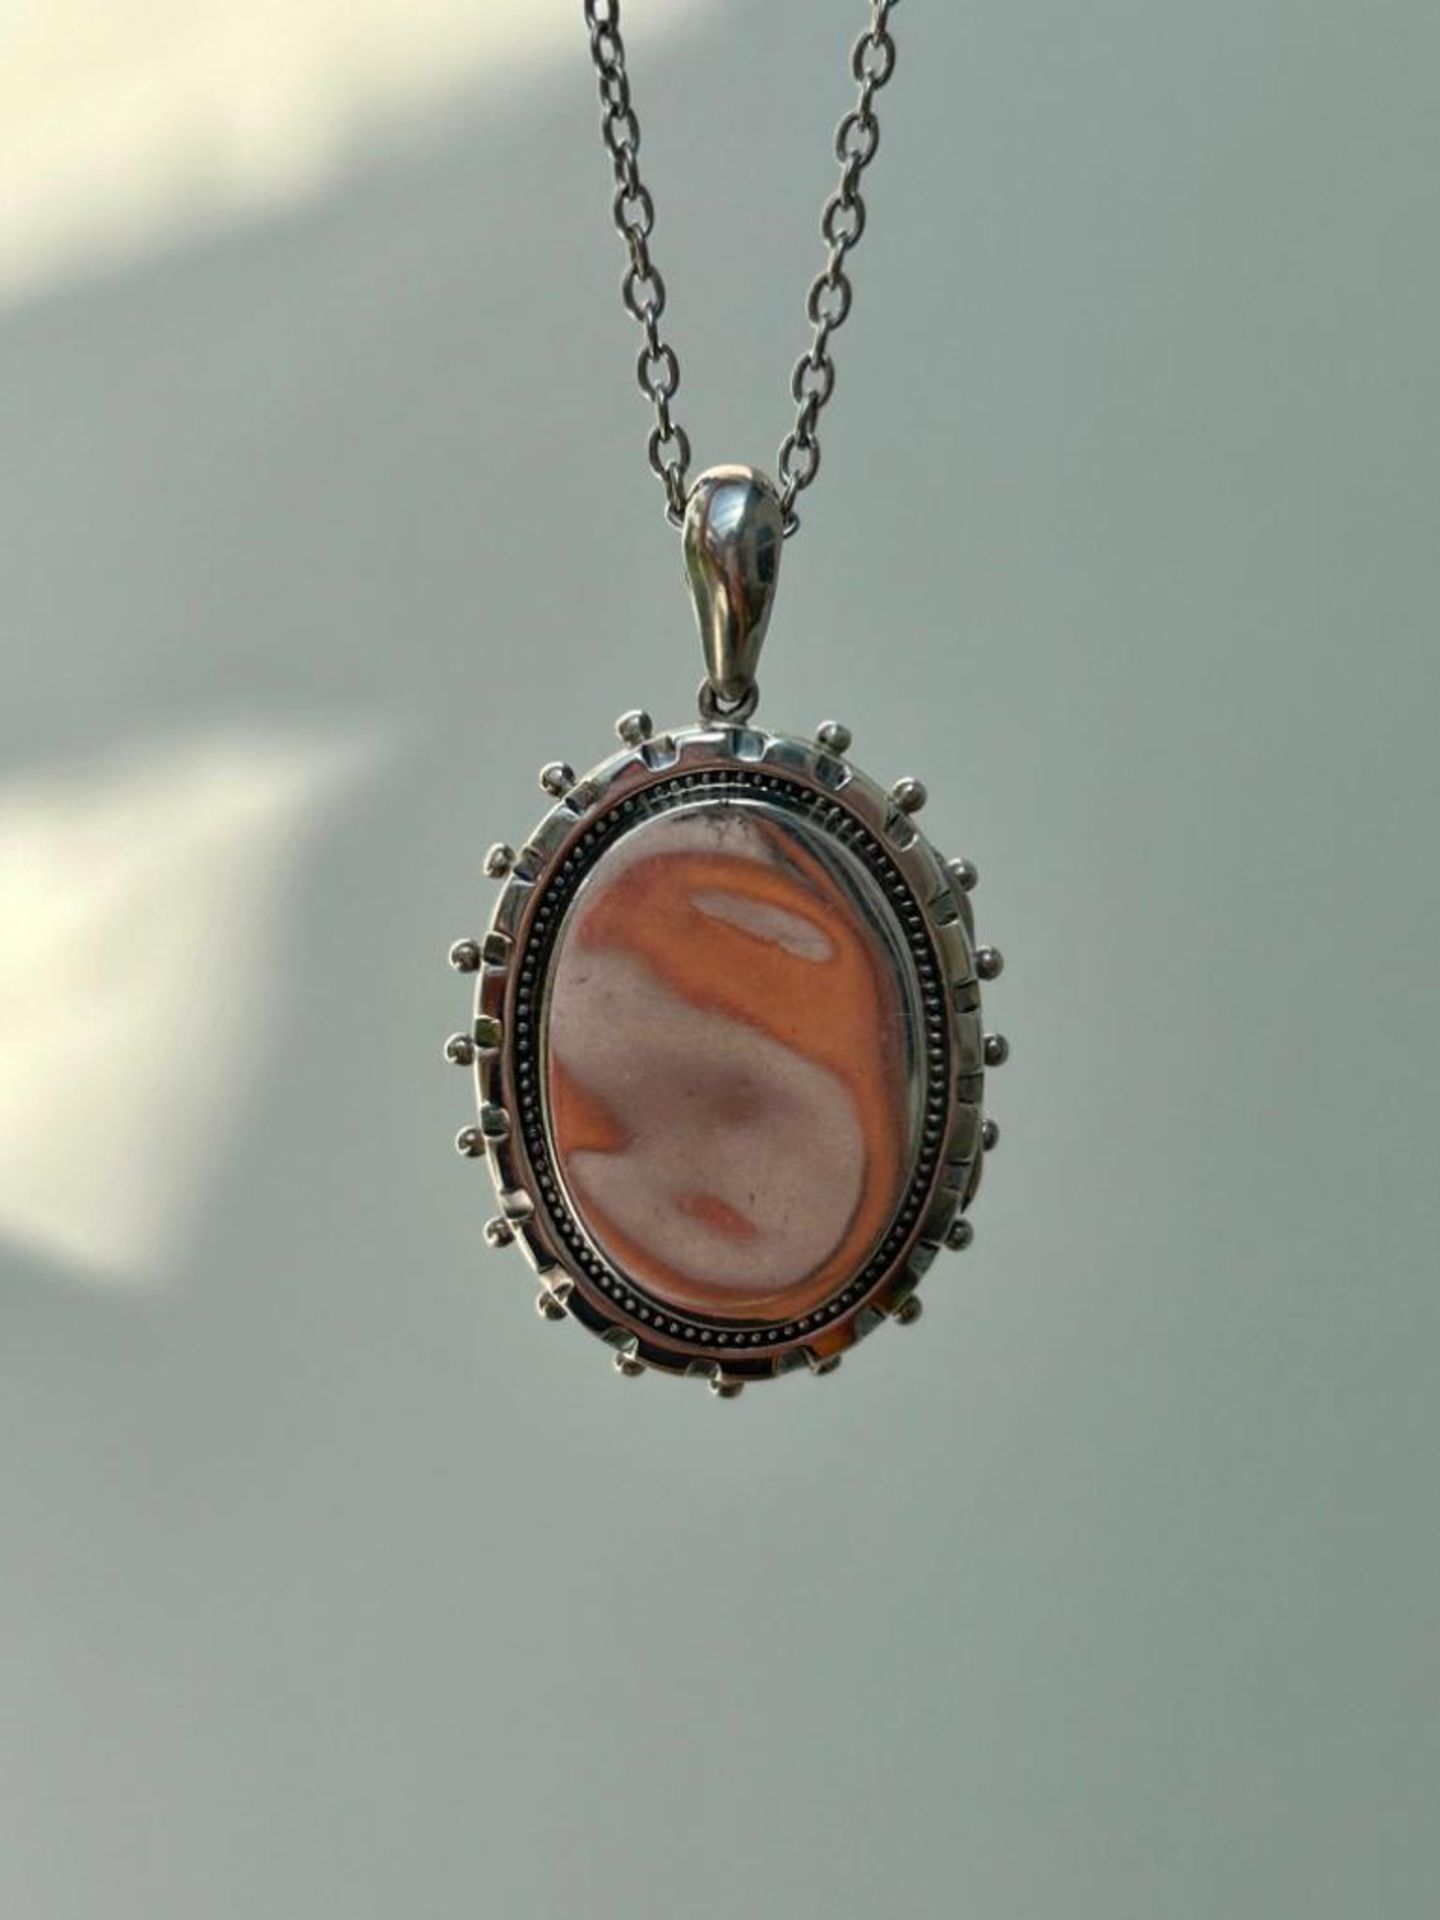 Victorian Era Aesthetic Silver Pendant on Chain - Image 4 of 5